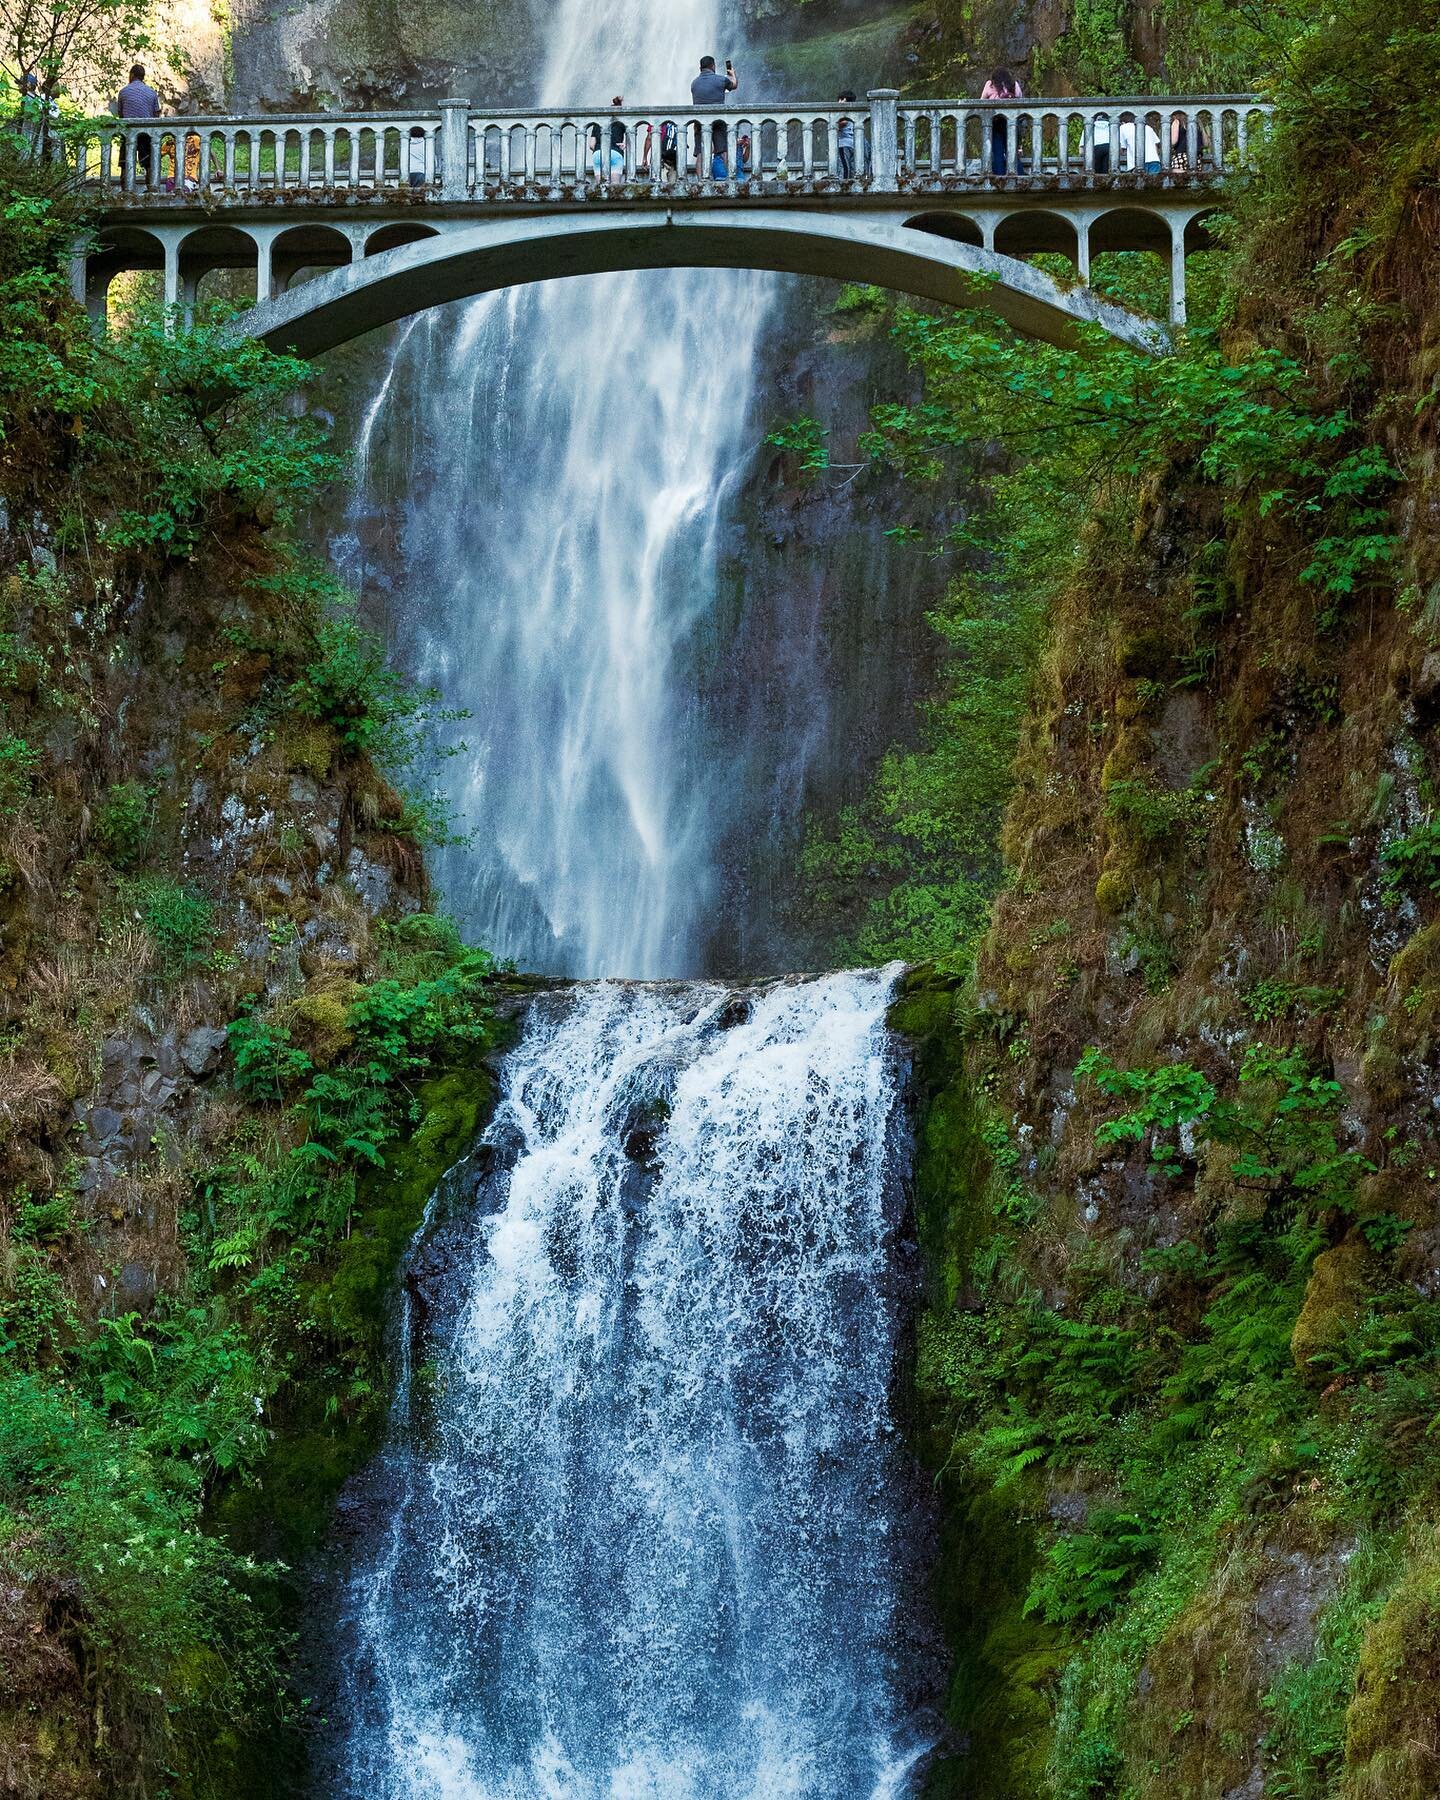 she was gorgeous🥹

Portland&rsquo;s gem in the winding day⛅️
➡️swipe for a full view of one beautiful waterfalls